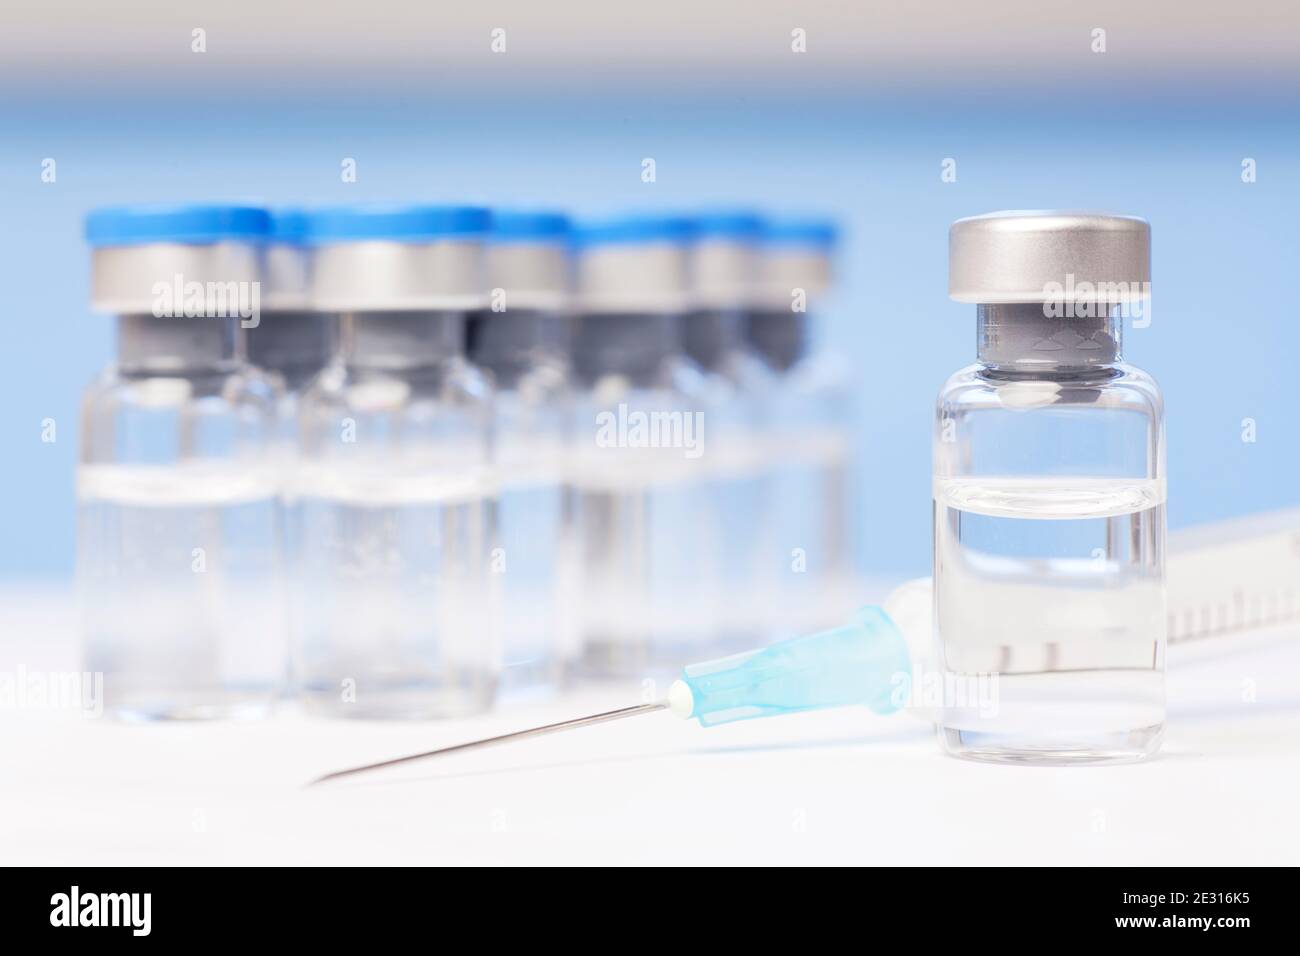 Vials and syringe with vaccine against covid-19 - focus on the vial in the foreground Stock Photo